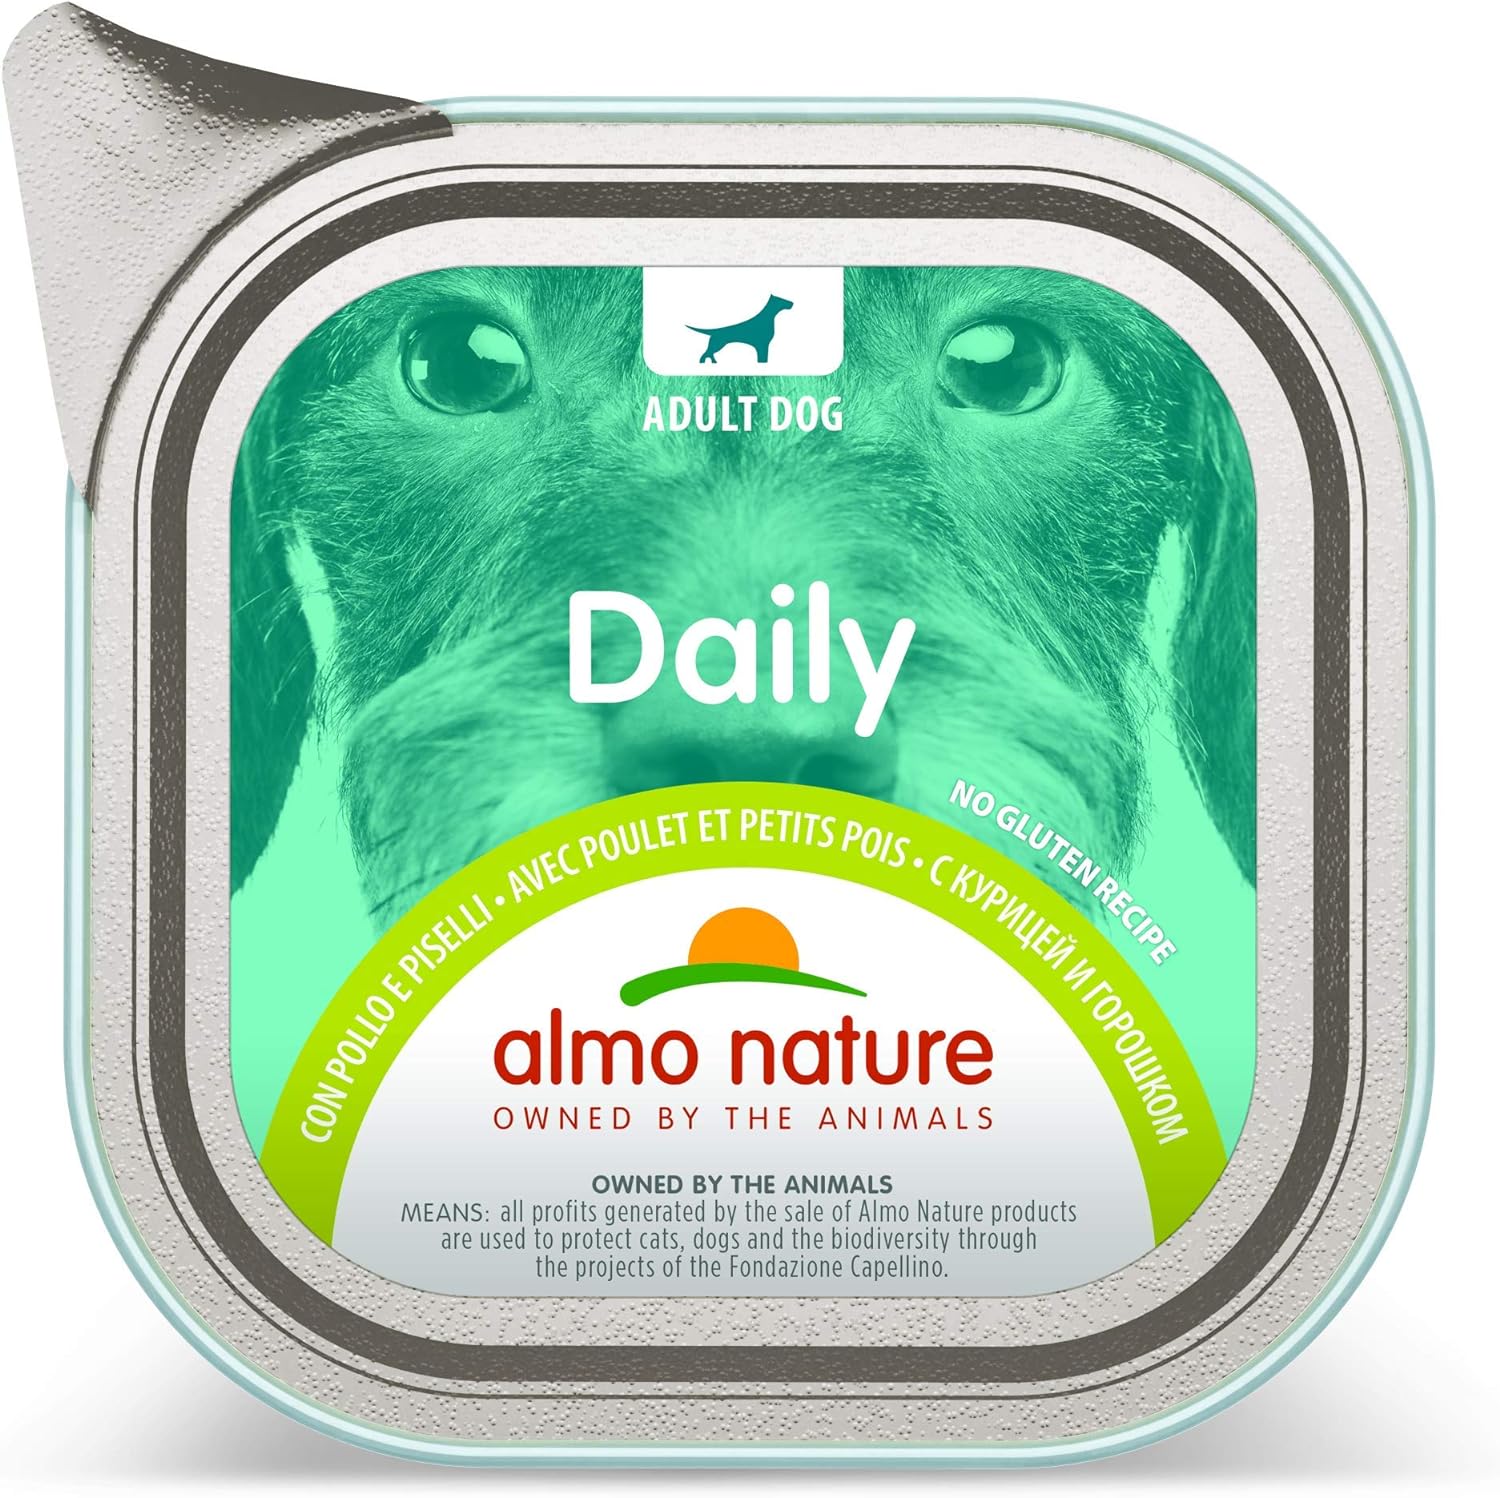 Almo Nature Daily Menu Dog No Grain Pate with Chicken and Peas, 100 g, Pack of 32?221